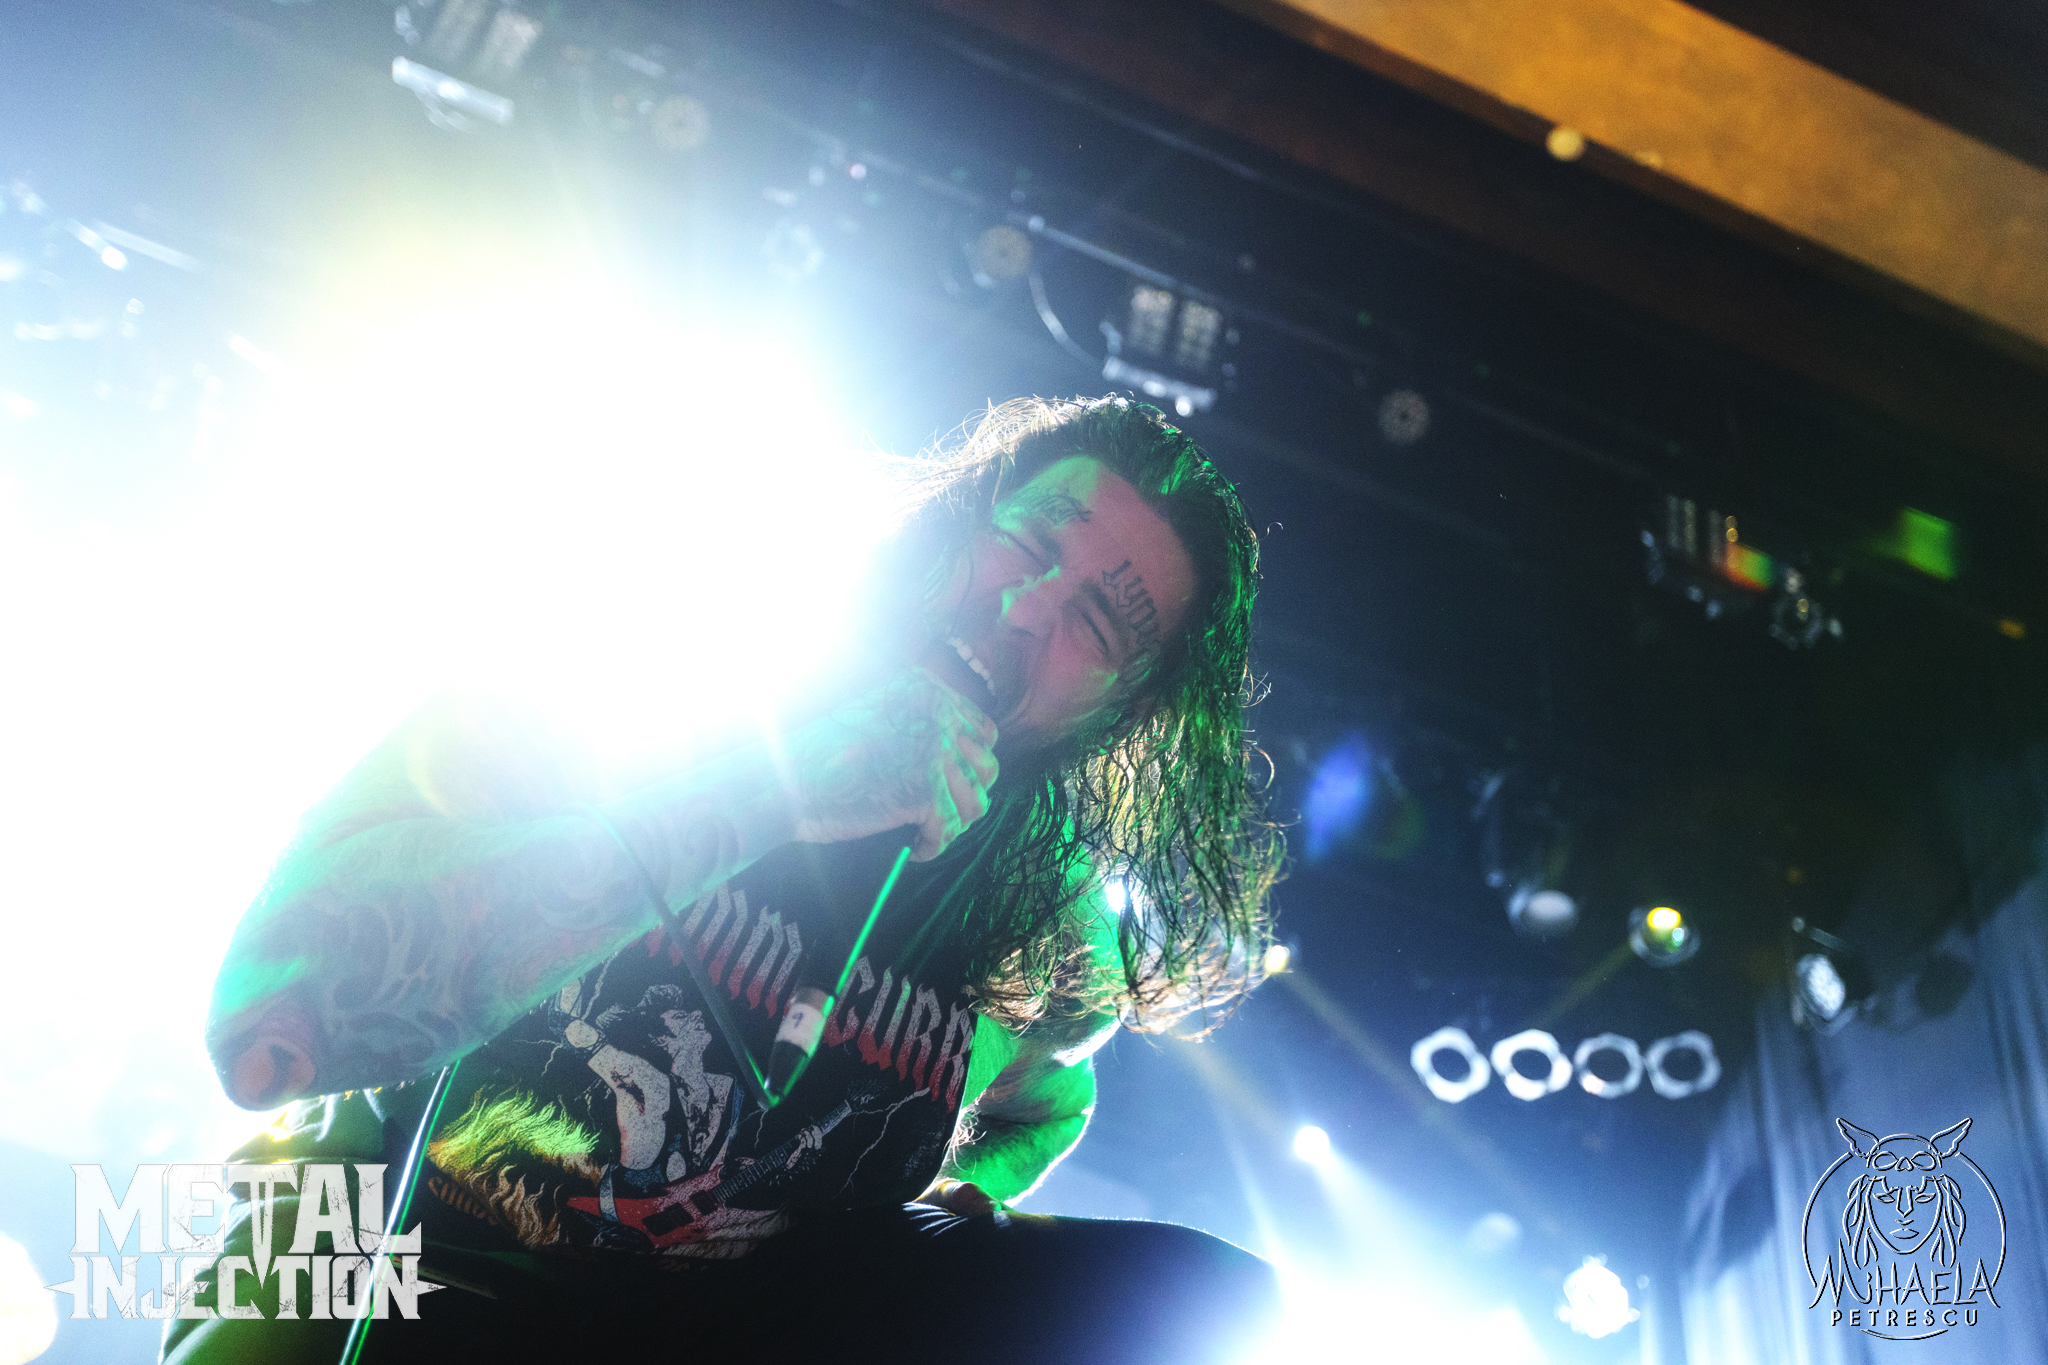 Photos: LORNA SHORE, ABORTED, INGESTED and more Quebec annihilated